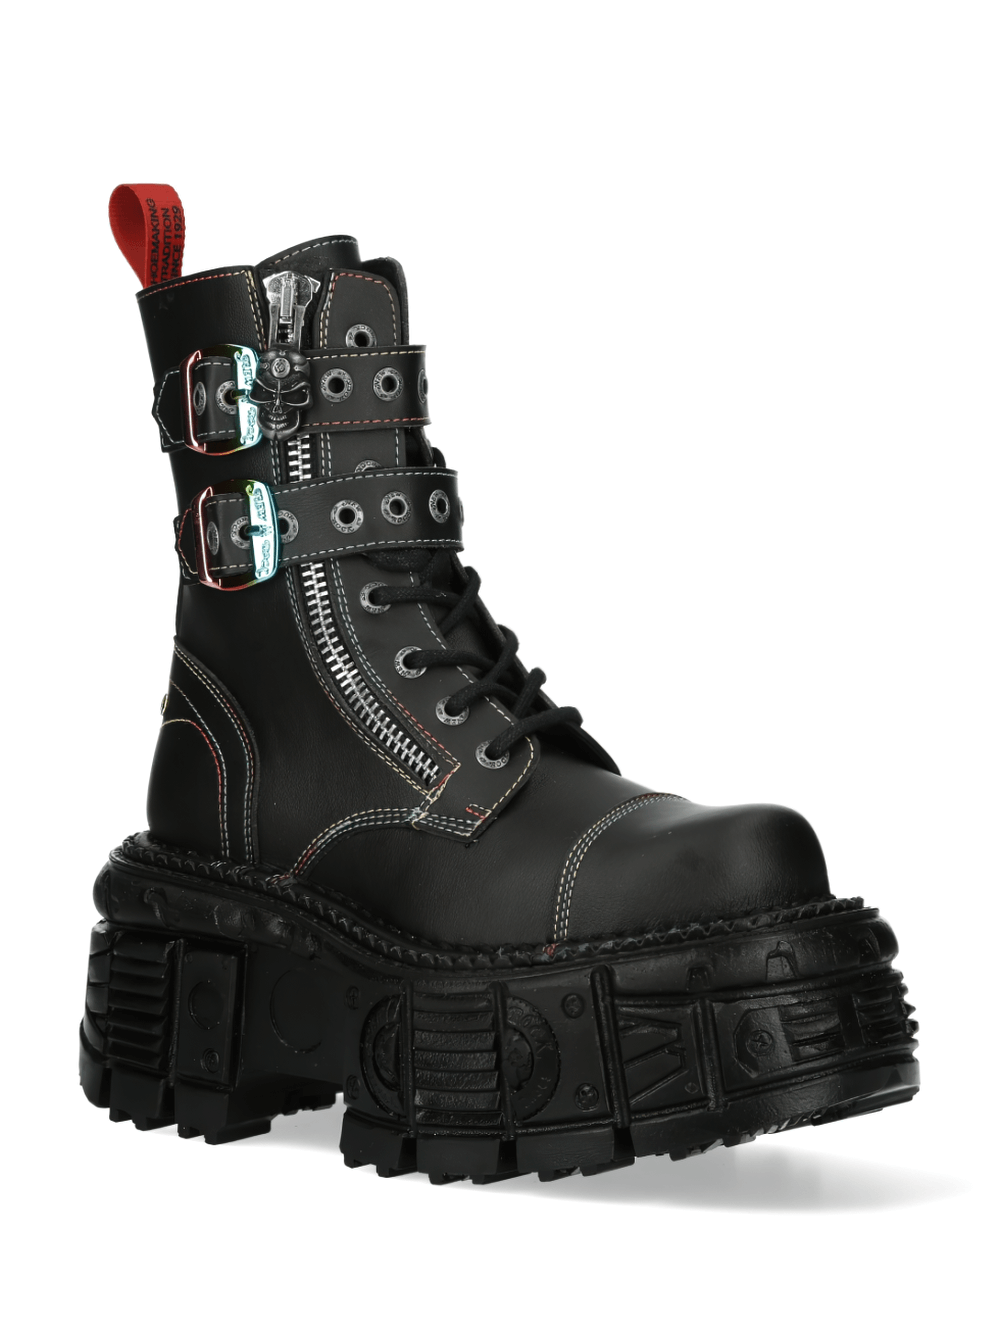 NEW ROCK Gothic Black Ankle Boots with Metallic Buckles